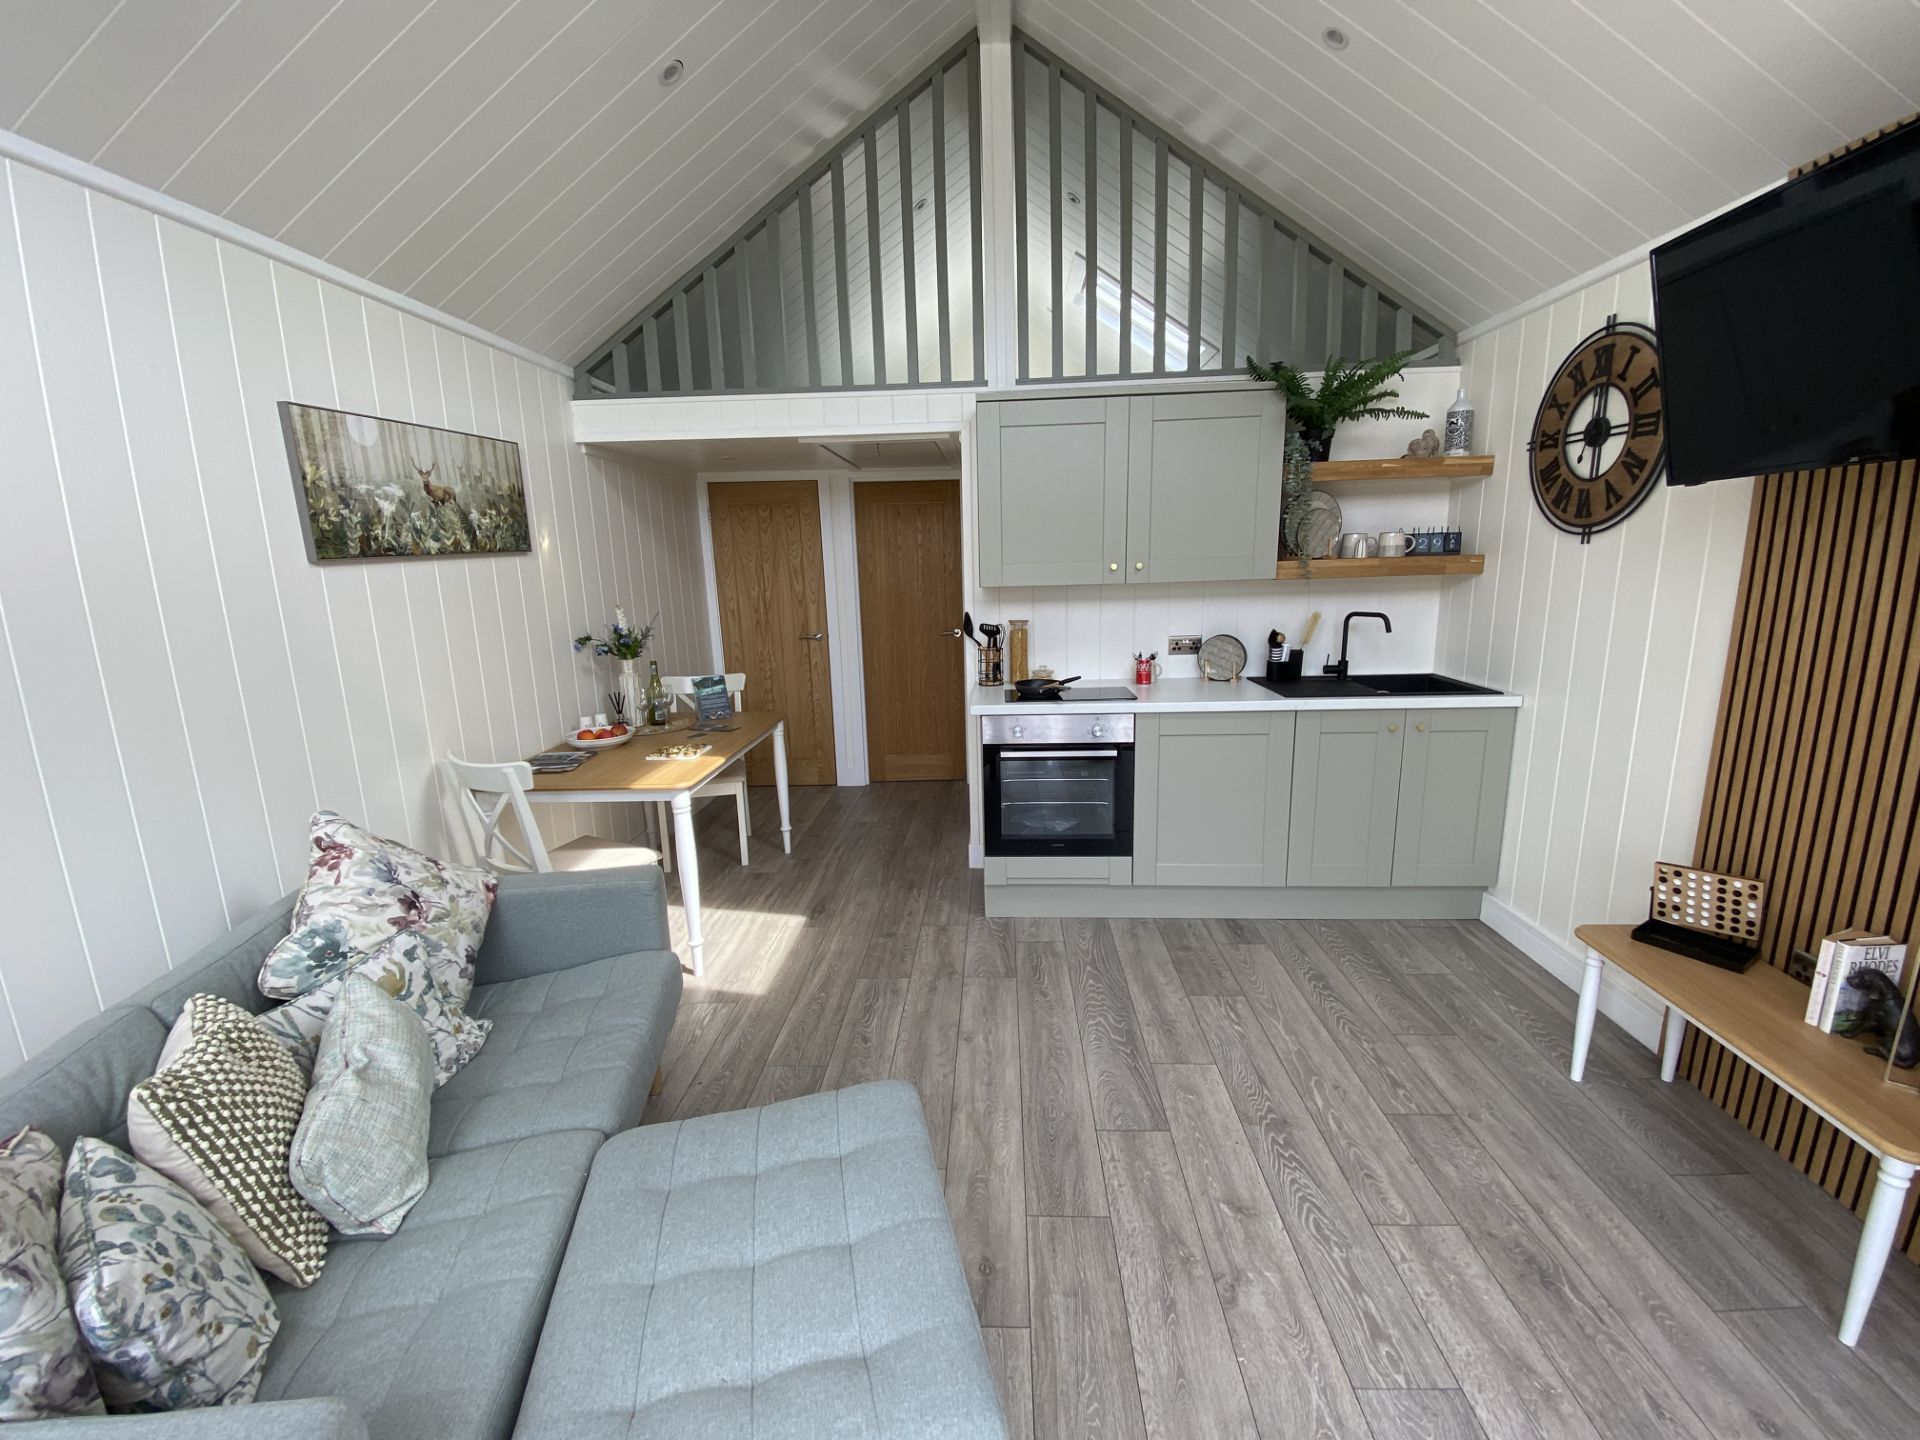 BAILEY CAMPING POD (2 storey 8m x 4m approx) Open Plan Layout Comprising Kitchen/Diner, 2 Bedrooms, - Image 3 of 54